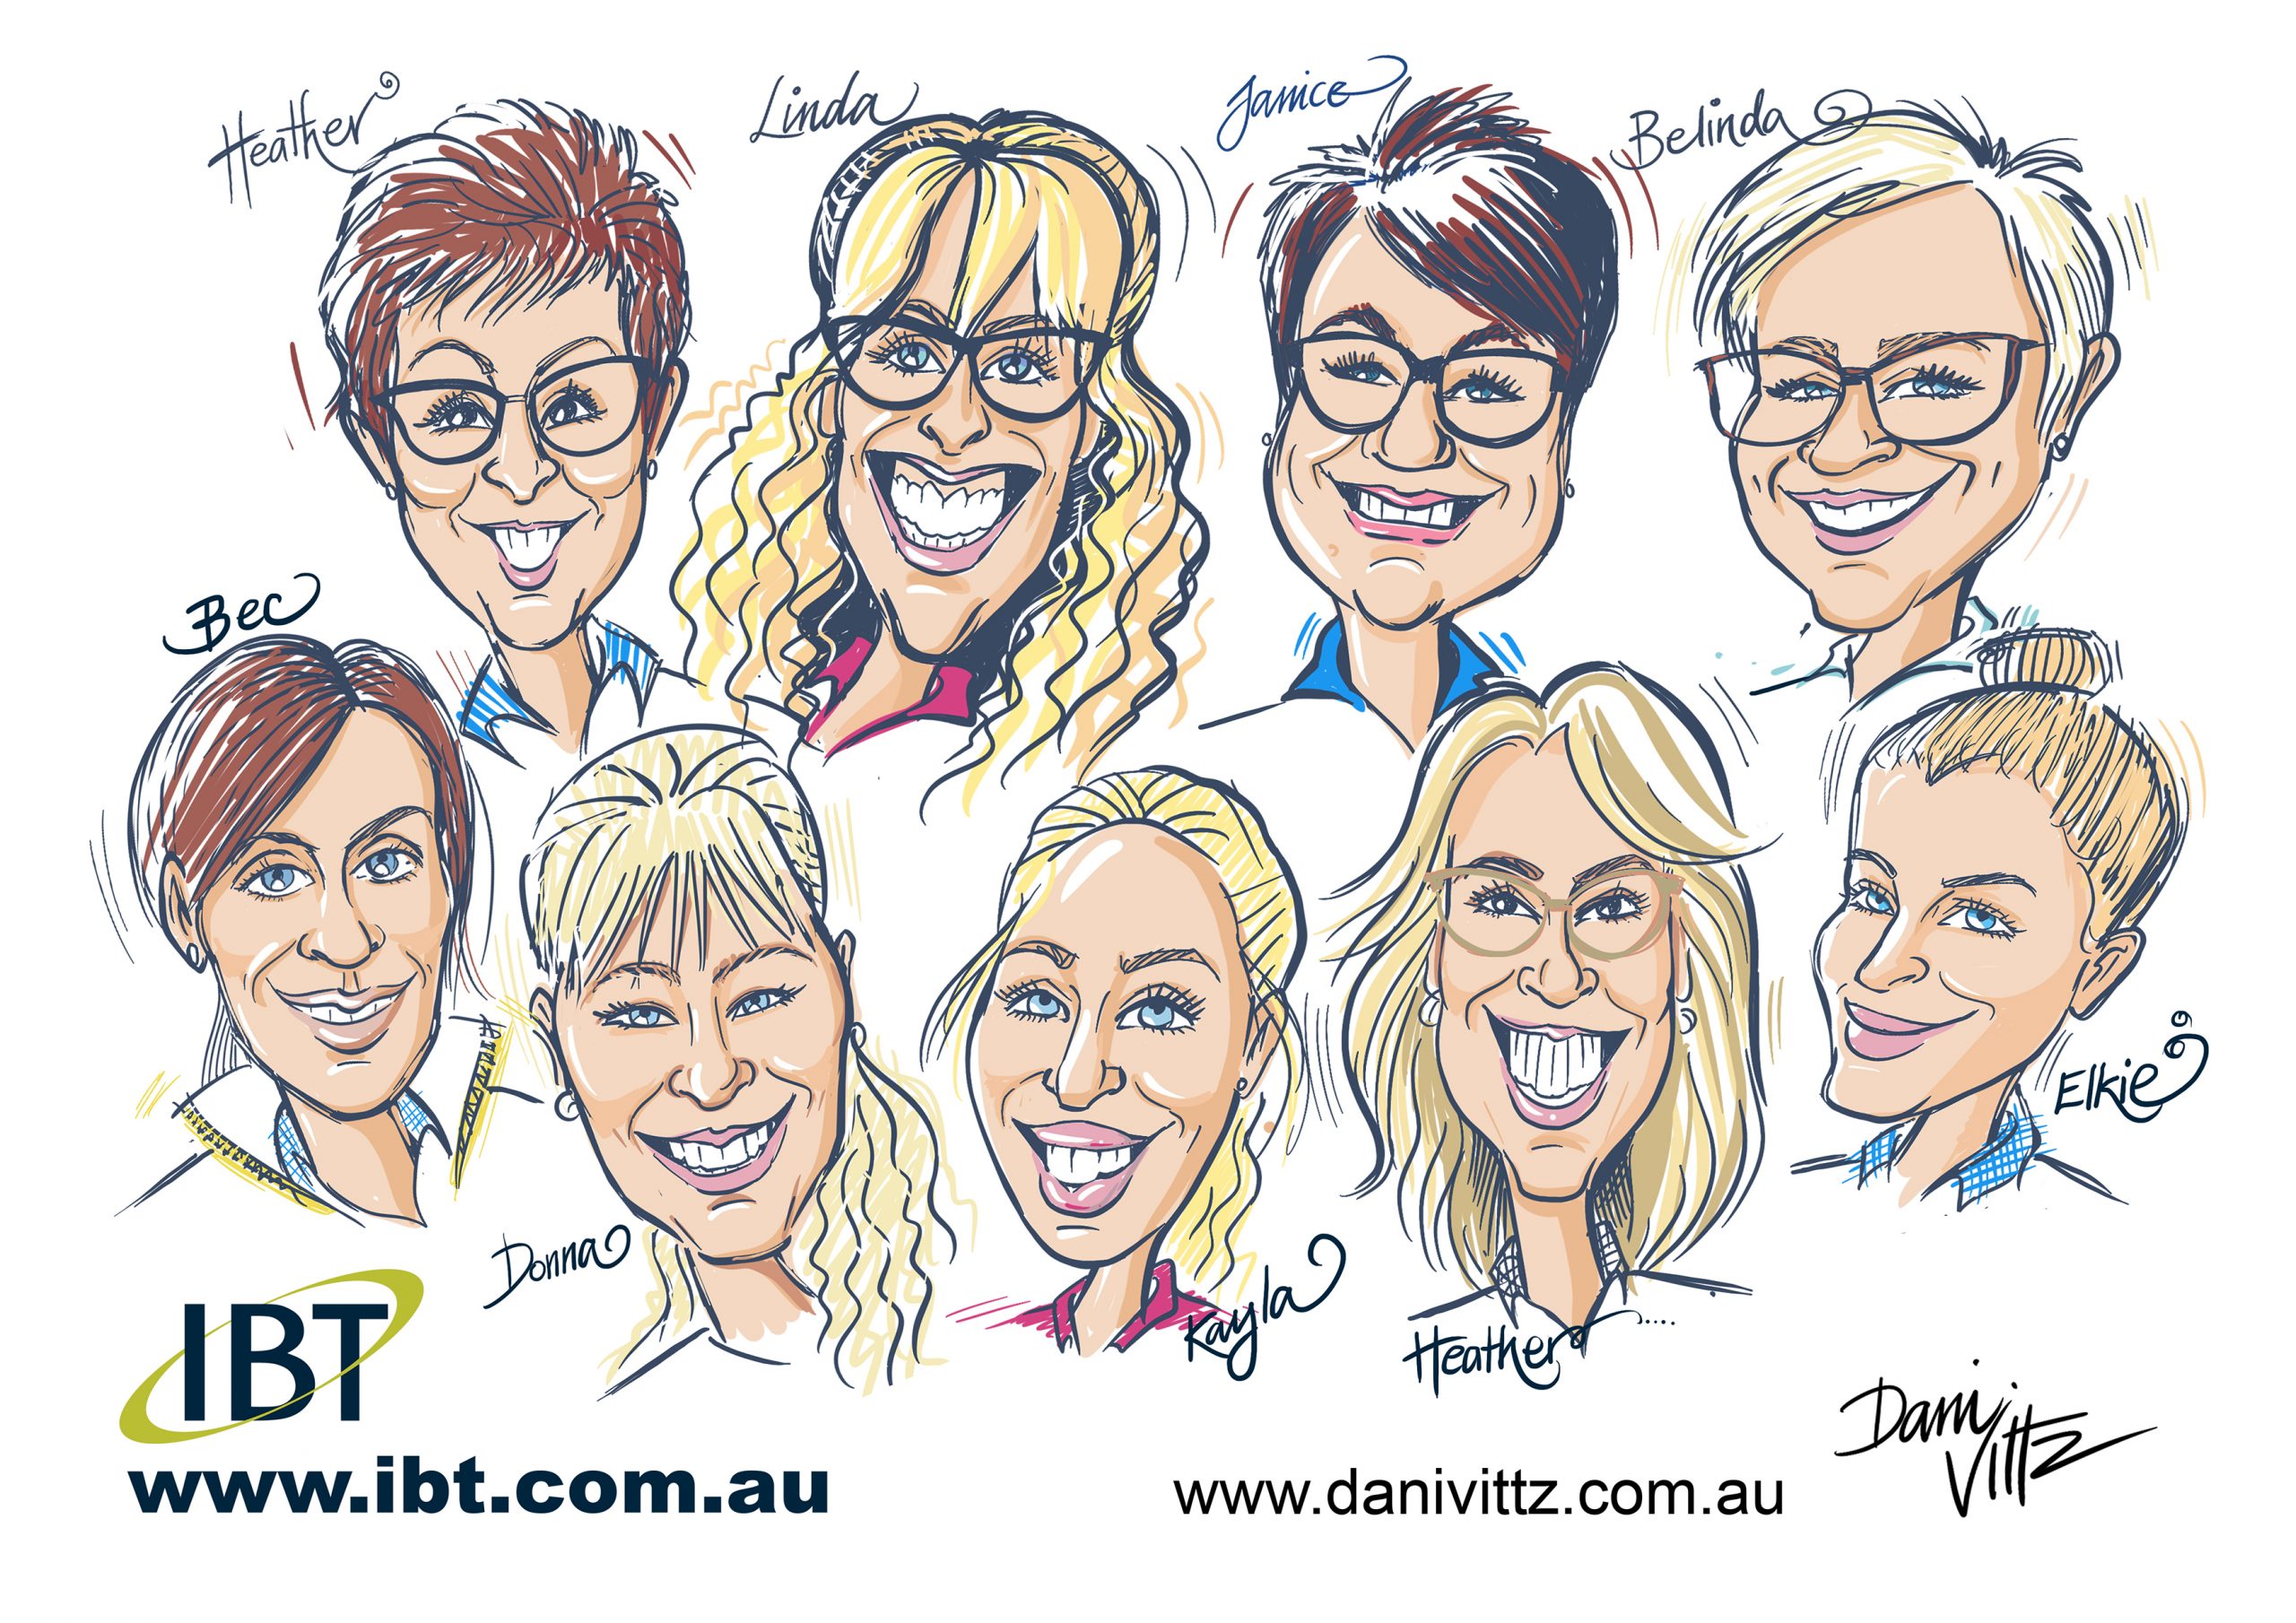 Digital Caricature created as a marketing tool for IBT at the Henty Field Days in 2019